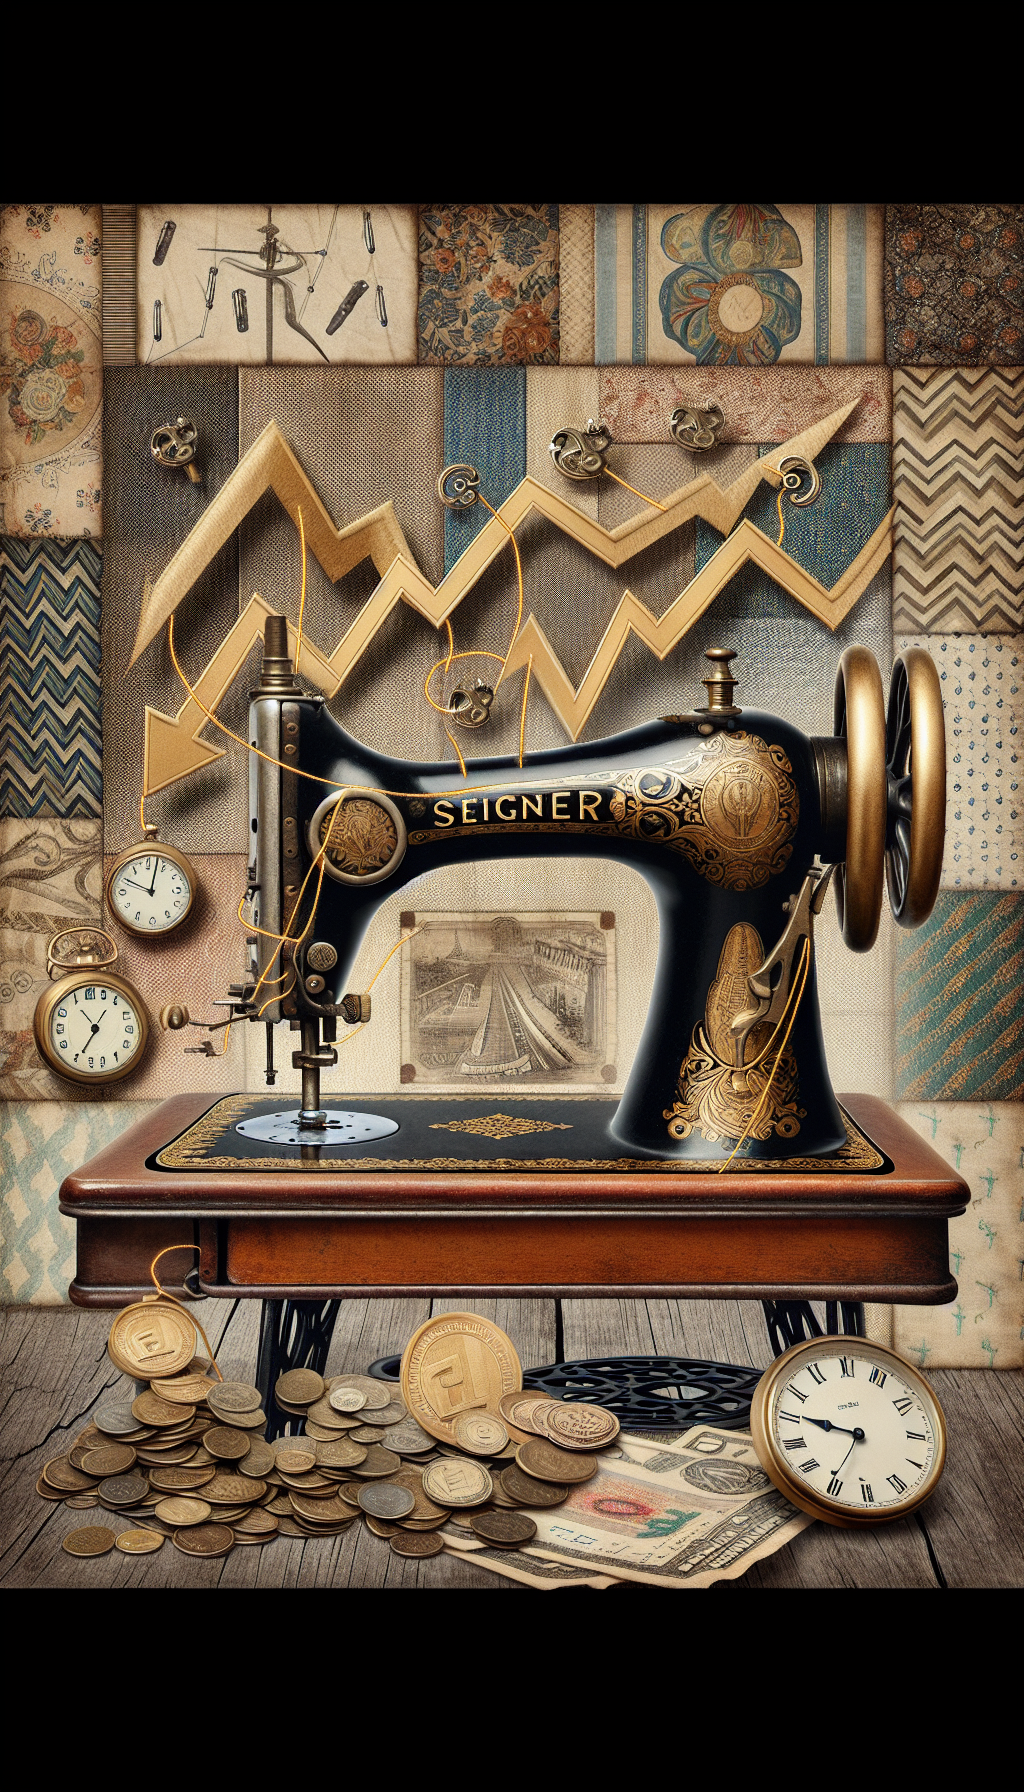 A whimsical steampunk-inspired collage featuring an elegant, ornate antique Singer sewing machine entwined with golden thread that morphs into rising graph lines and vintage clocks, symbolizing the investment value over time. Patchwork style fabrics with classic market trend patterns (like chevrons or paisleys) form the backdrop, with currency symbols subtly stitched in, hinting at the machine's collectible worth.